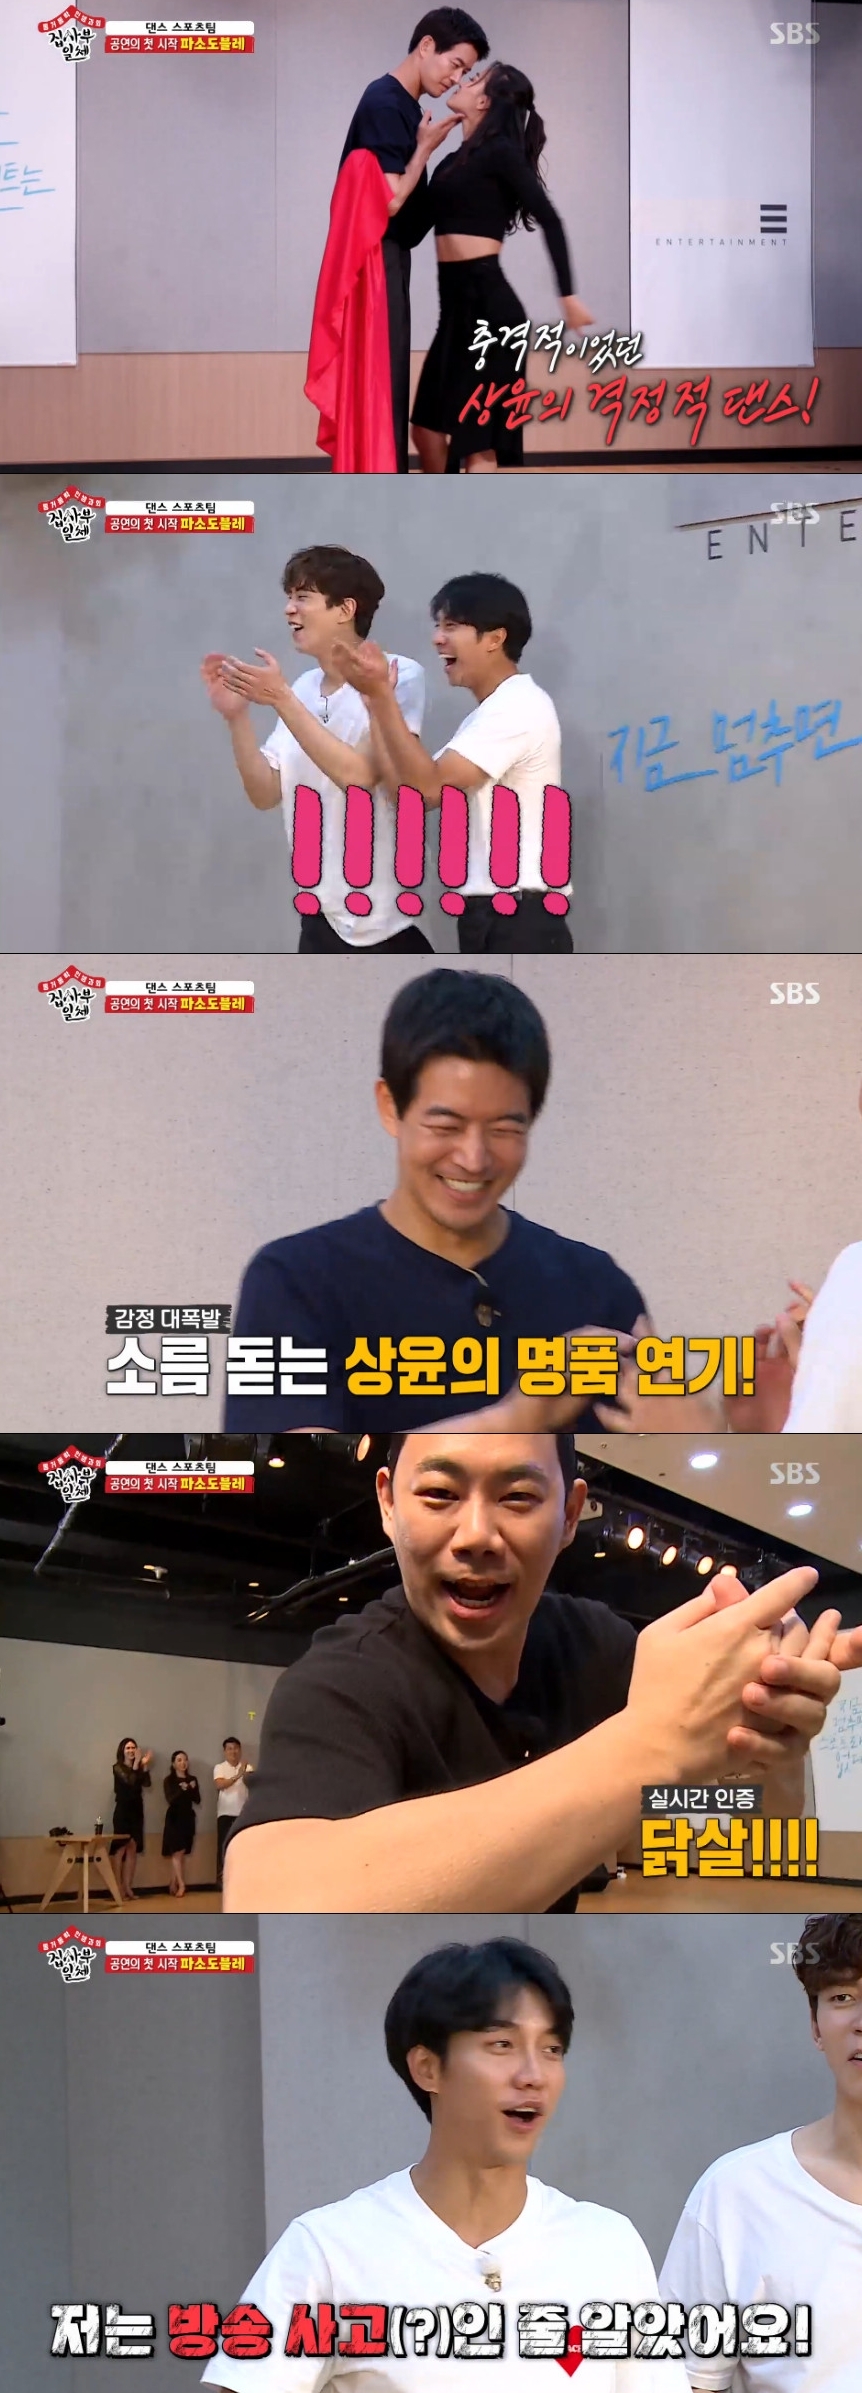 Actor Lee Sang-yoon succeeded in escaping from the body after being taught by Park Ji-woo, the god of dance.SBS All The Butlers, which was broadcast on September 8, was decorated with Park Ji-woo, Sesame Street dancer champion Jay Black, the first dance sports player in Korea.Lee Sang-yoon, Lee Seung-gi, Yang Se-hyeong, and Yook Sungjae admired Park Ji-woo and Jay Black, who showed colorful dance skills with their appearance.Lee Sang-yoon, who had the lowest dance ability among the members and was teased, could not hide his worried expression.Lee Sang-yoon said, I think I will grow 1cm of beard tomorrow.Park Ji-woo said, Honestly, Sang Yoon is the biggest worry, but I think that I can make it the best in some ways.I can do it because I can create oil from nothing, Yang Se-hyeong said, We watched and nothing was nothing.I couldnt get Yu (), so I made the members laugh.I finally have a workshop for the dance club tomorrow at this place, Park Ji-woo said.We were invited to the workshop performance, he said, and the upside was astonished.Since then, the members have started to prepare for the dance collaboration stage.Park Ji-woo showed a sexy dance to Camilla Cabeyos hit song Havana, and Jay Black danced more theft than Park Ji-woo.Lee Seung-gi said, Its shocking that (dance sports and Sesame Street dance) collaboration is possible, while Lee Sang-yoon admired it as really cool.Yang Se-hyeong laughed when he touched Lee Sang-yoons chin, saying, Its not a sincere lie, I grew a beard under Lee Sang-yoons chin.If youre the world champion, Im the last in town, said Lee Sang-yoon, who said: Dont look at the process from today to tomorrow, look at the results, Ill make it for you.I do not think there is any body or body in the world, because I have not learned, because I have not learned, he added.Yang Se-hyeong said, I have not met anything that can say this.Park Ji-woo accepted Lee Seung-gi, Lee Sang-yoon and Shin Sung-rok as disciples.The Jay Black team was joined by Yang Se-hyeong and Yook Sungjae.Park Ji-woo taught me from the basic stage to the maximum level of three peoples dancing skills.There was a nervous look on the faces of Lee Sang-yoon, Lee Seung-gi and Shin Sung-rok, who watched Spains passionate dance Pasodoble demonstration.Lee Sang-yoon, who challenged Paso Doble directly, made a mistake of hitting his partners abdomen hard, but in the ending, he impressed Park Ji-woo with his performance as if he were kissing his partner.Park Ji-woo ran to the camera and showed him the chicken, saying he had chicken on his arm.I thought I was really kissing, Shin Sung-rok said, while Lee Seung-gi shouted, I thought it was a real broadcast accident.The stage of the rising type will be released on the 15th broadcast.hwang hye-jin